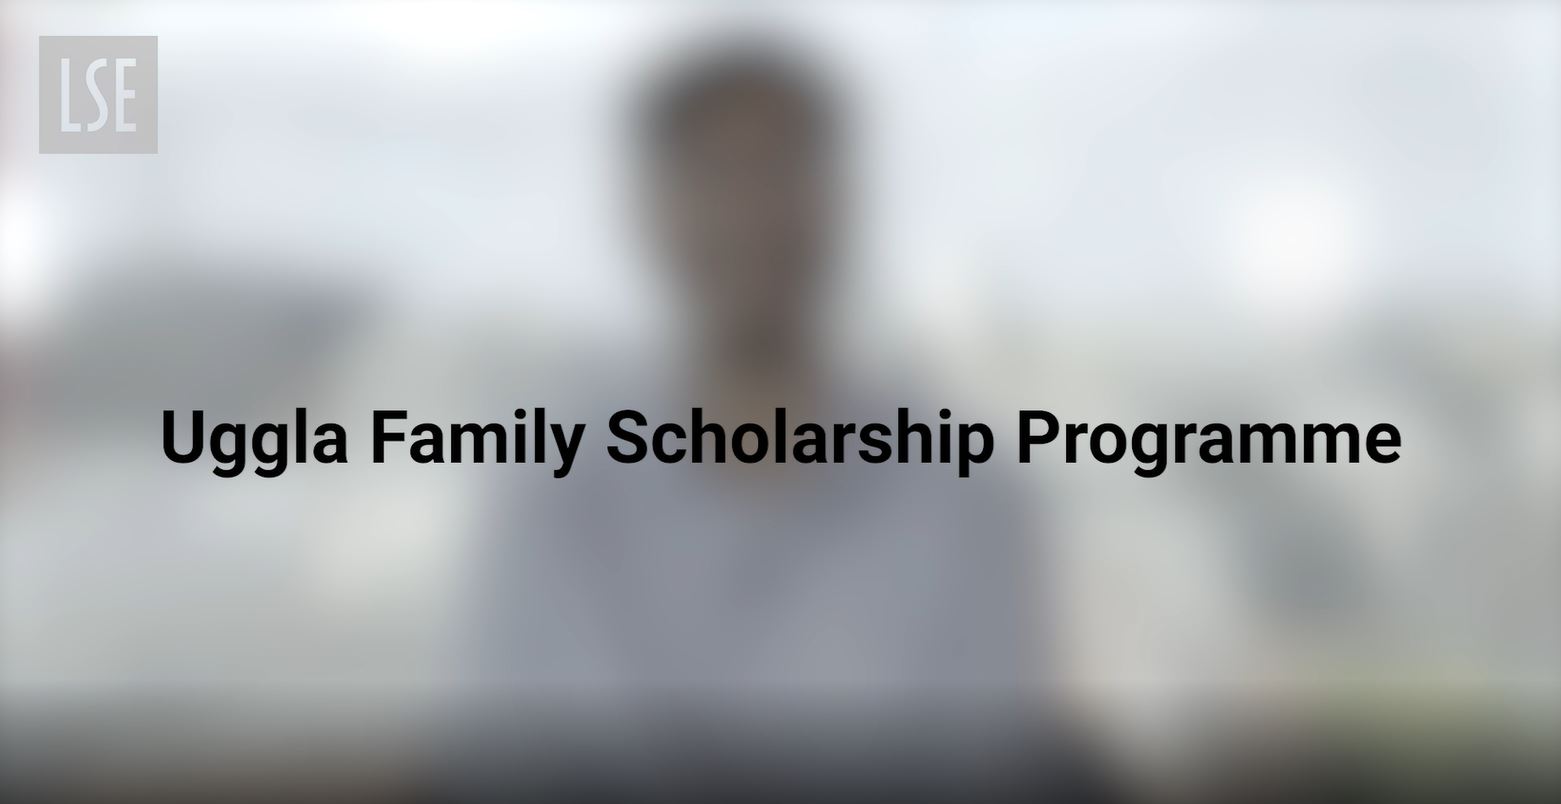 Introduction to the Uggla Family Scholarship Programme